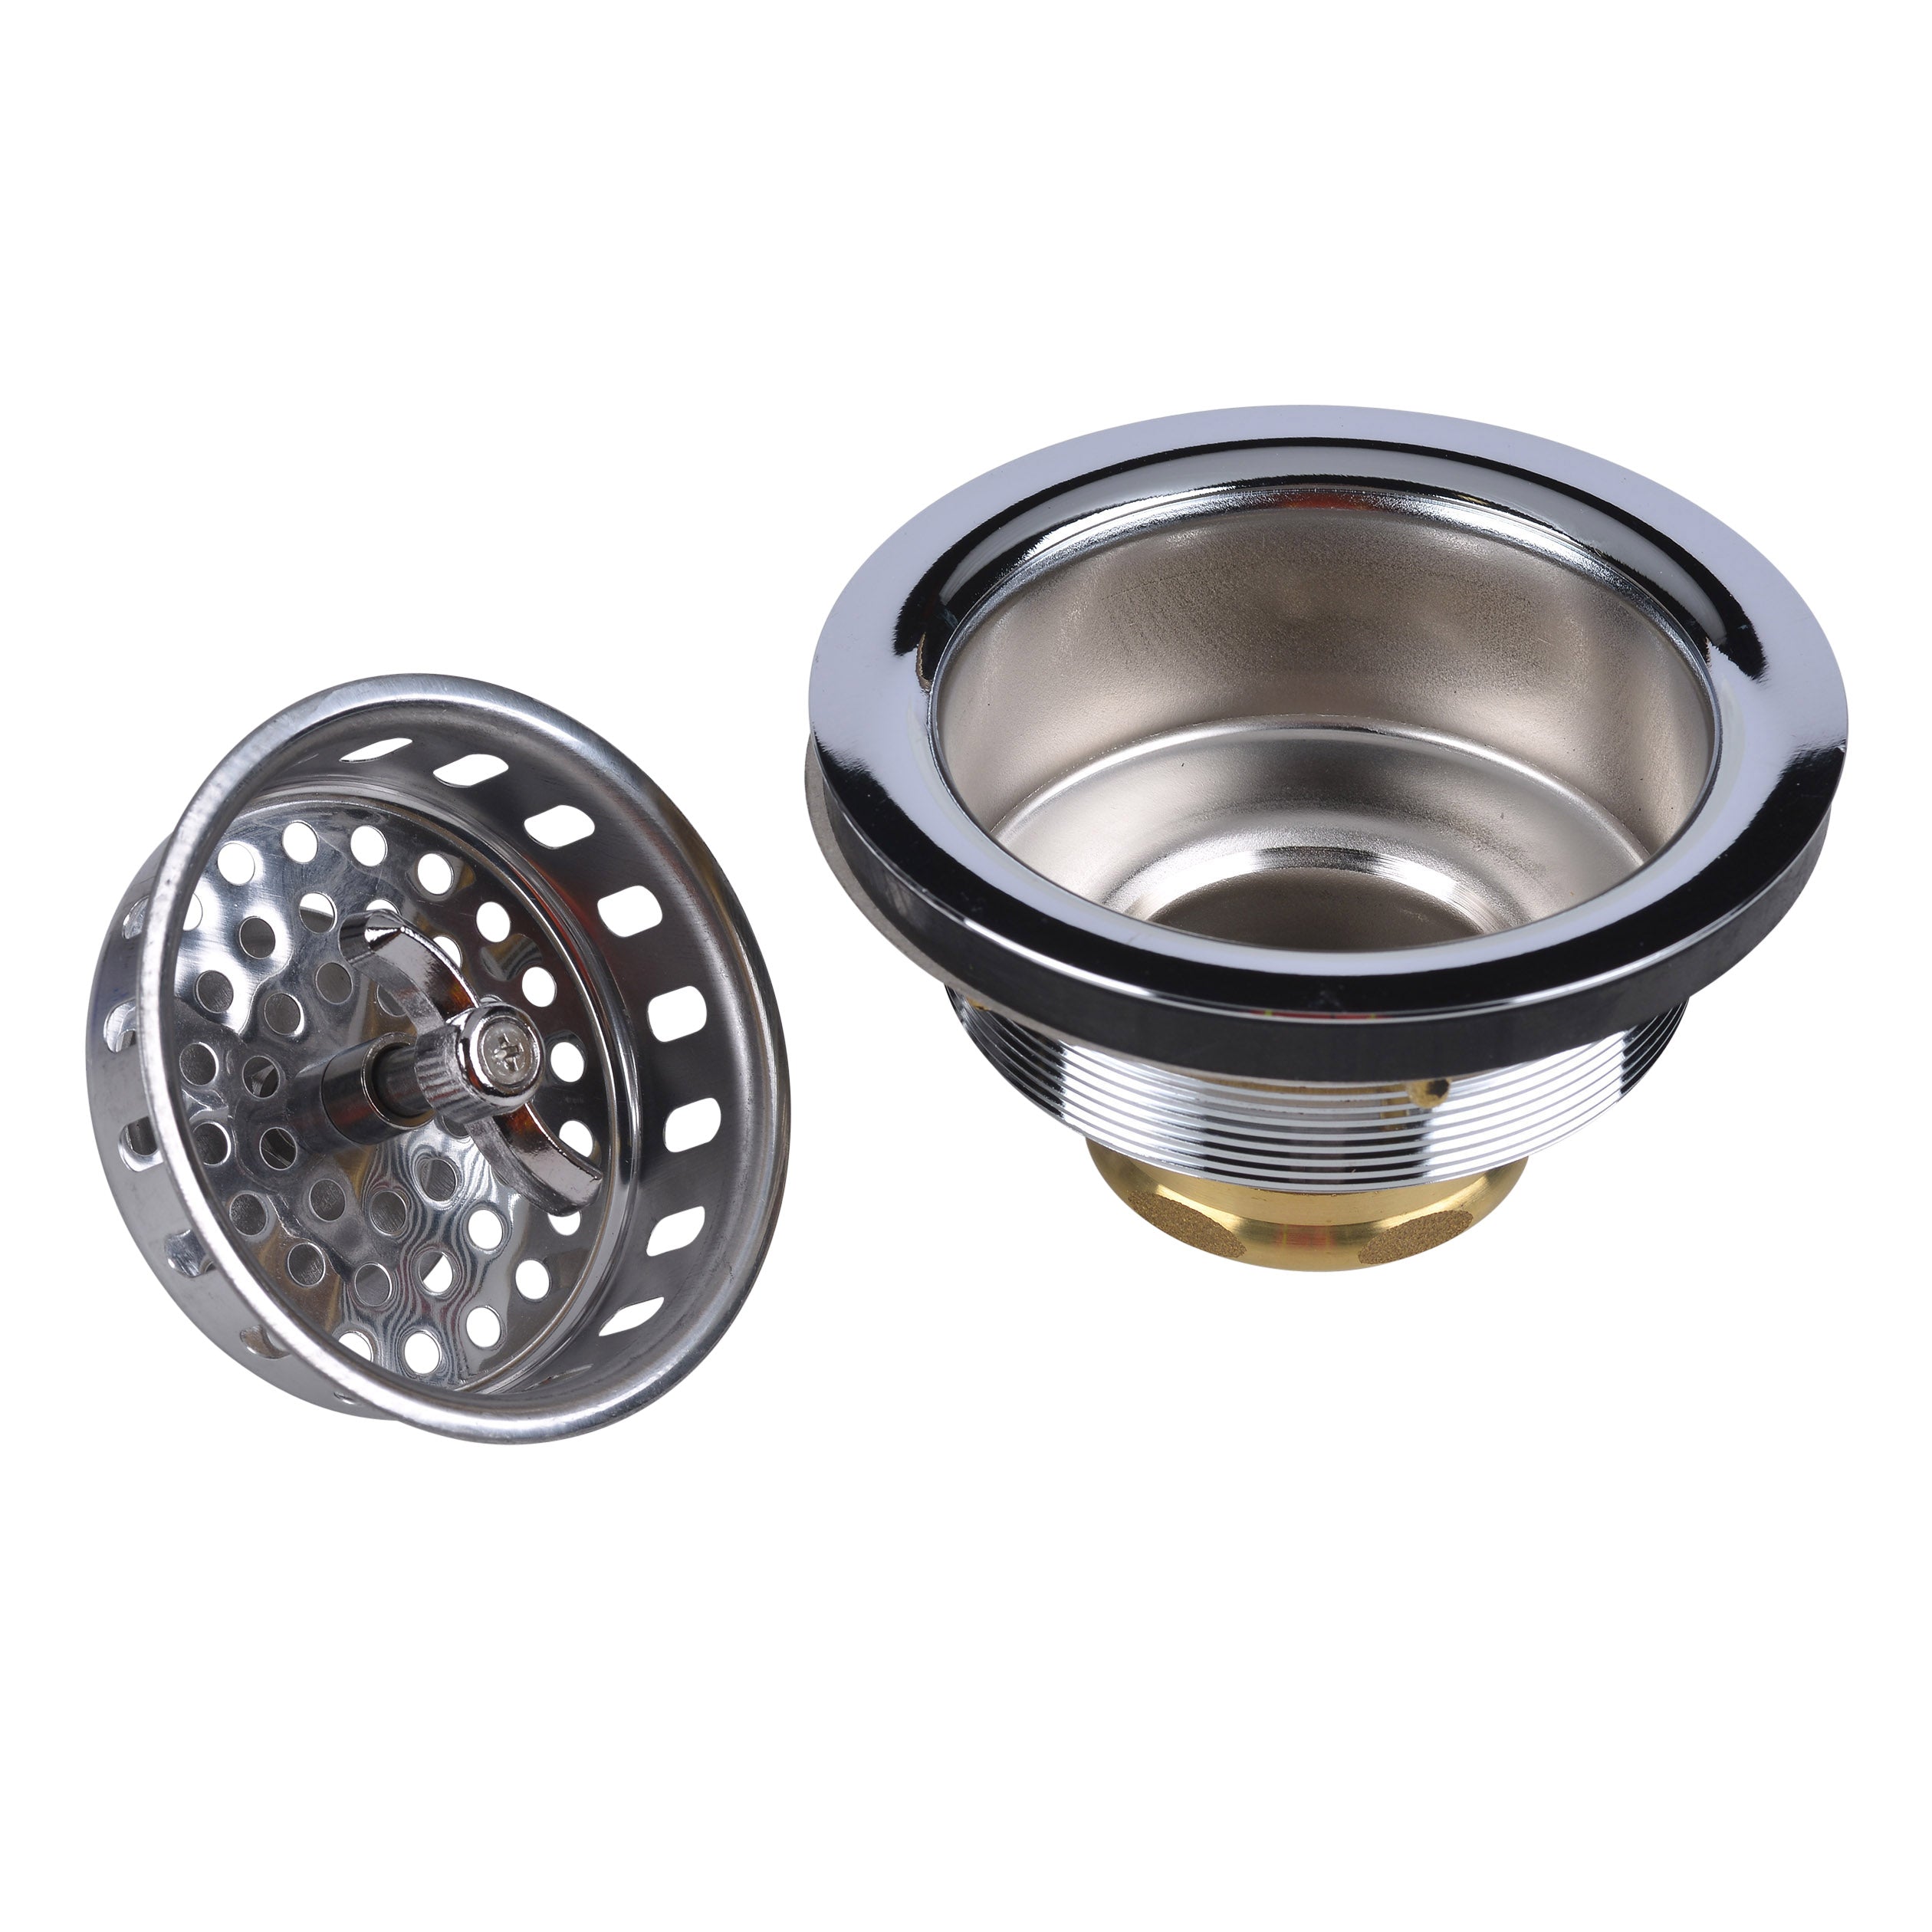 Groomer´s Best Drain and Strainer